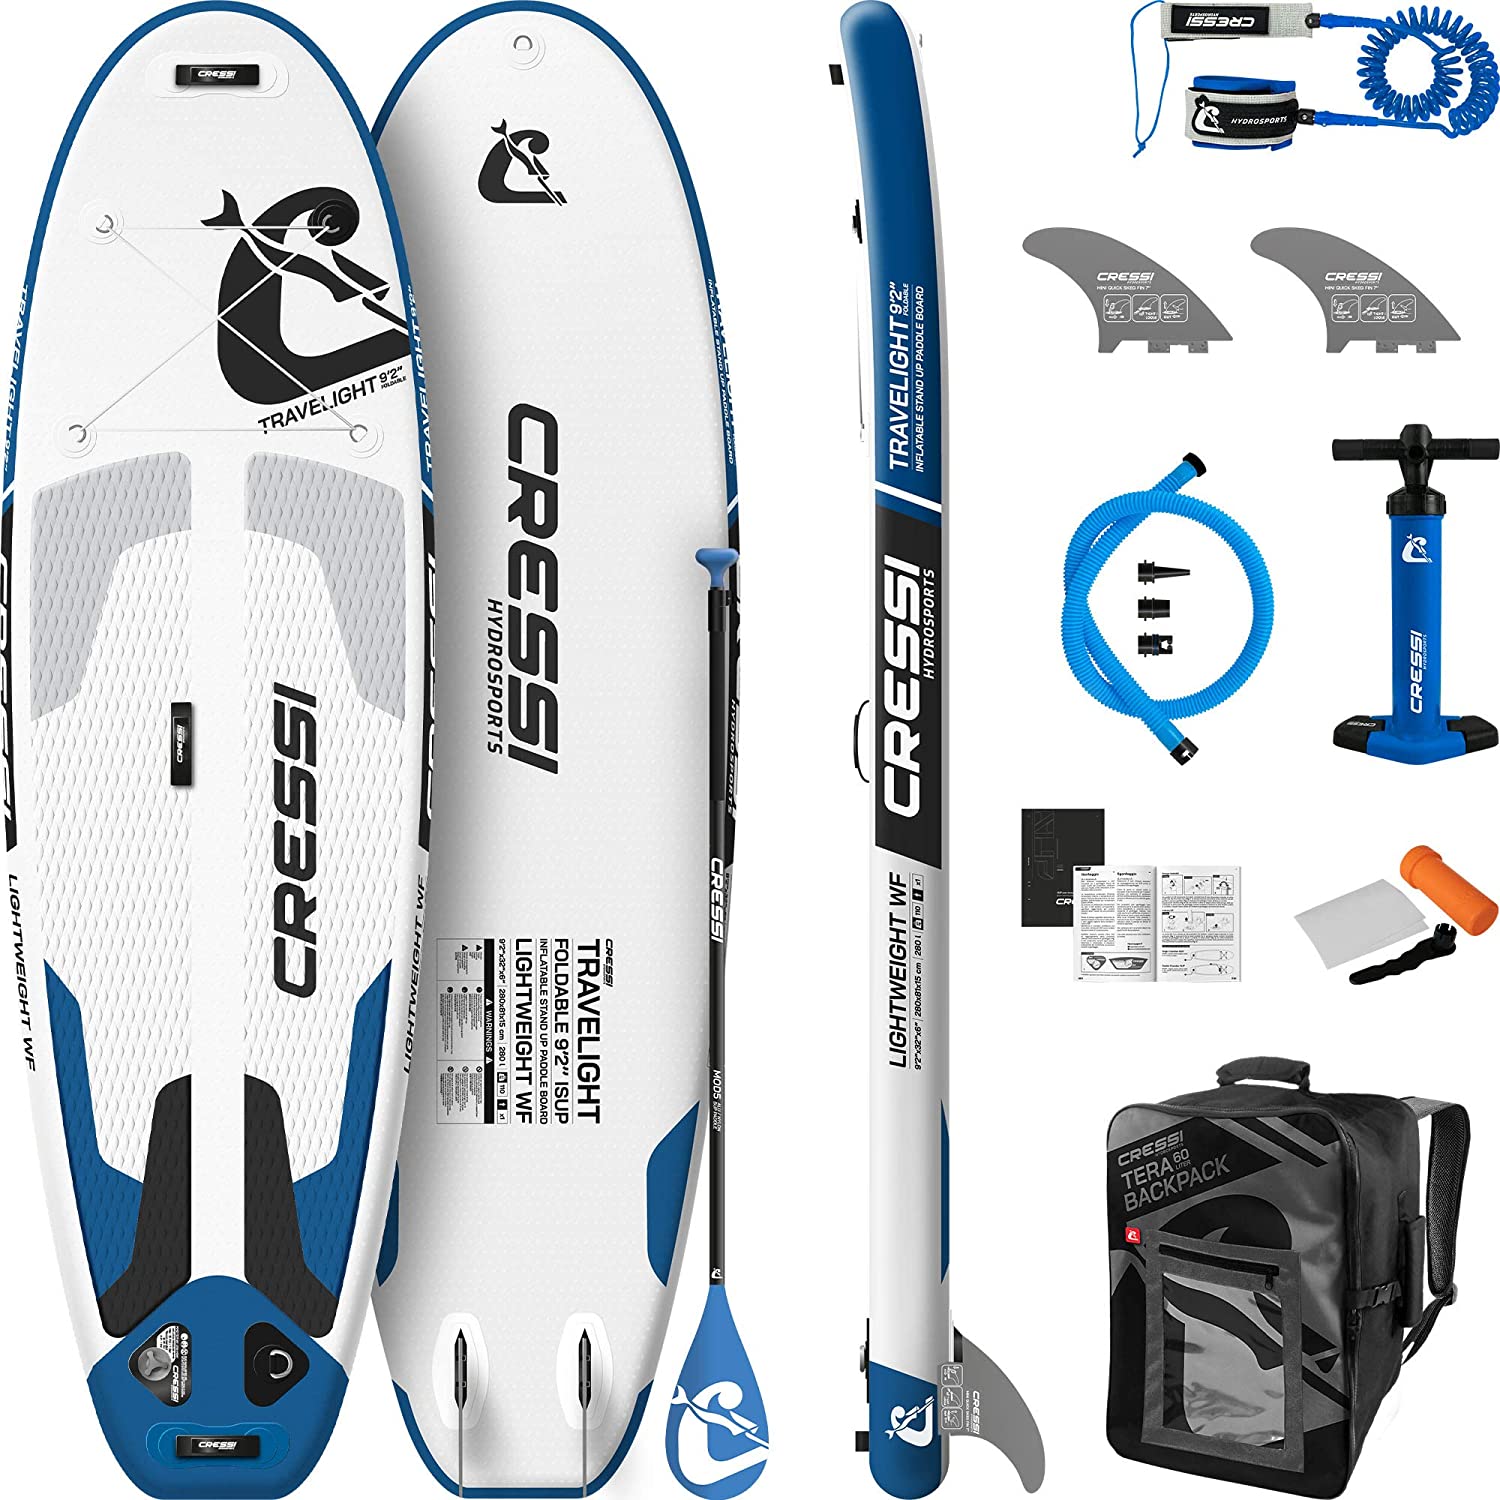 CRESSI TRAVELIGHT FOLDABLE iSUP SET 9'2" SUP Stand Up Paddling Board